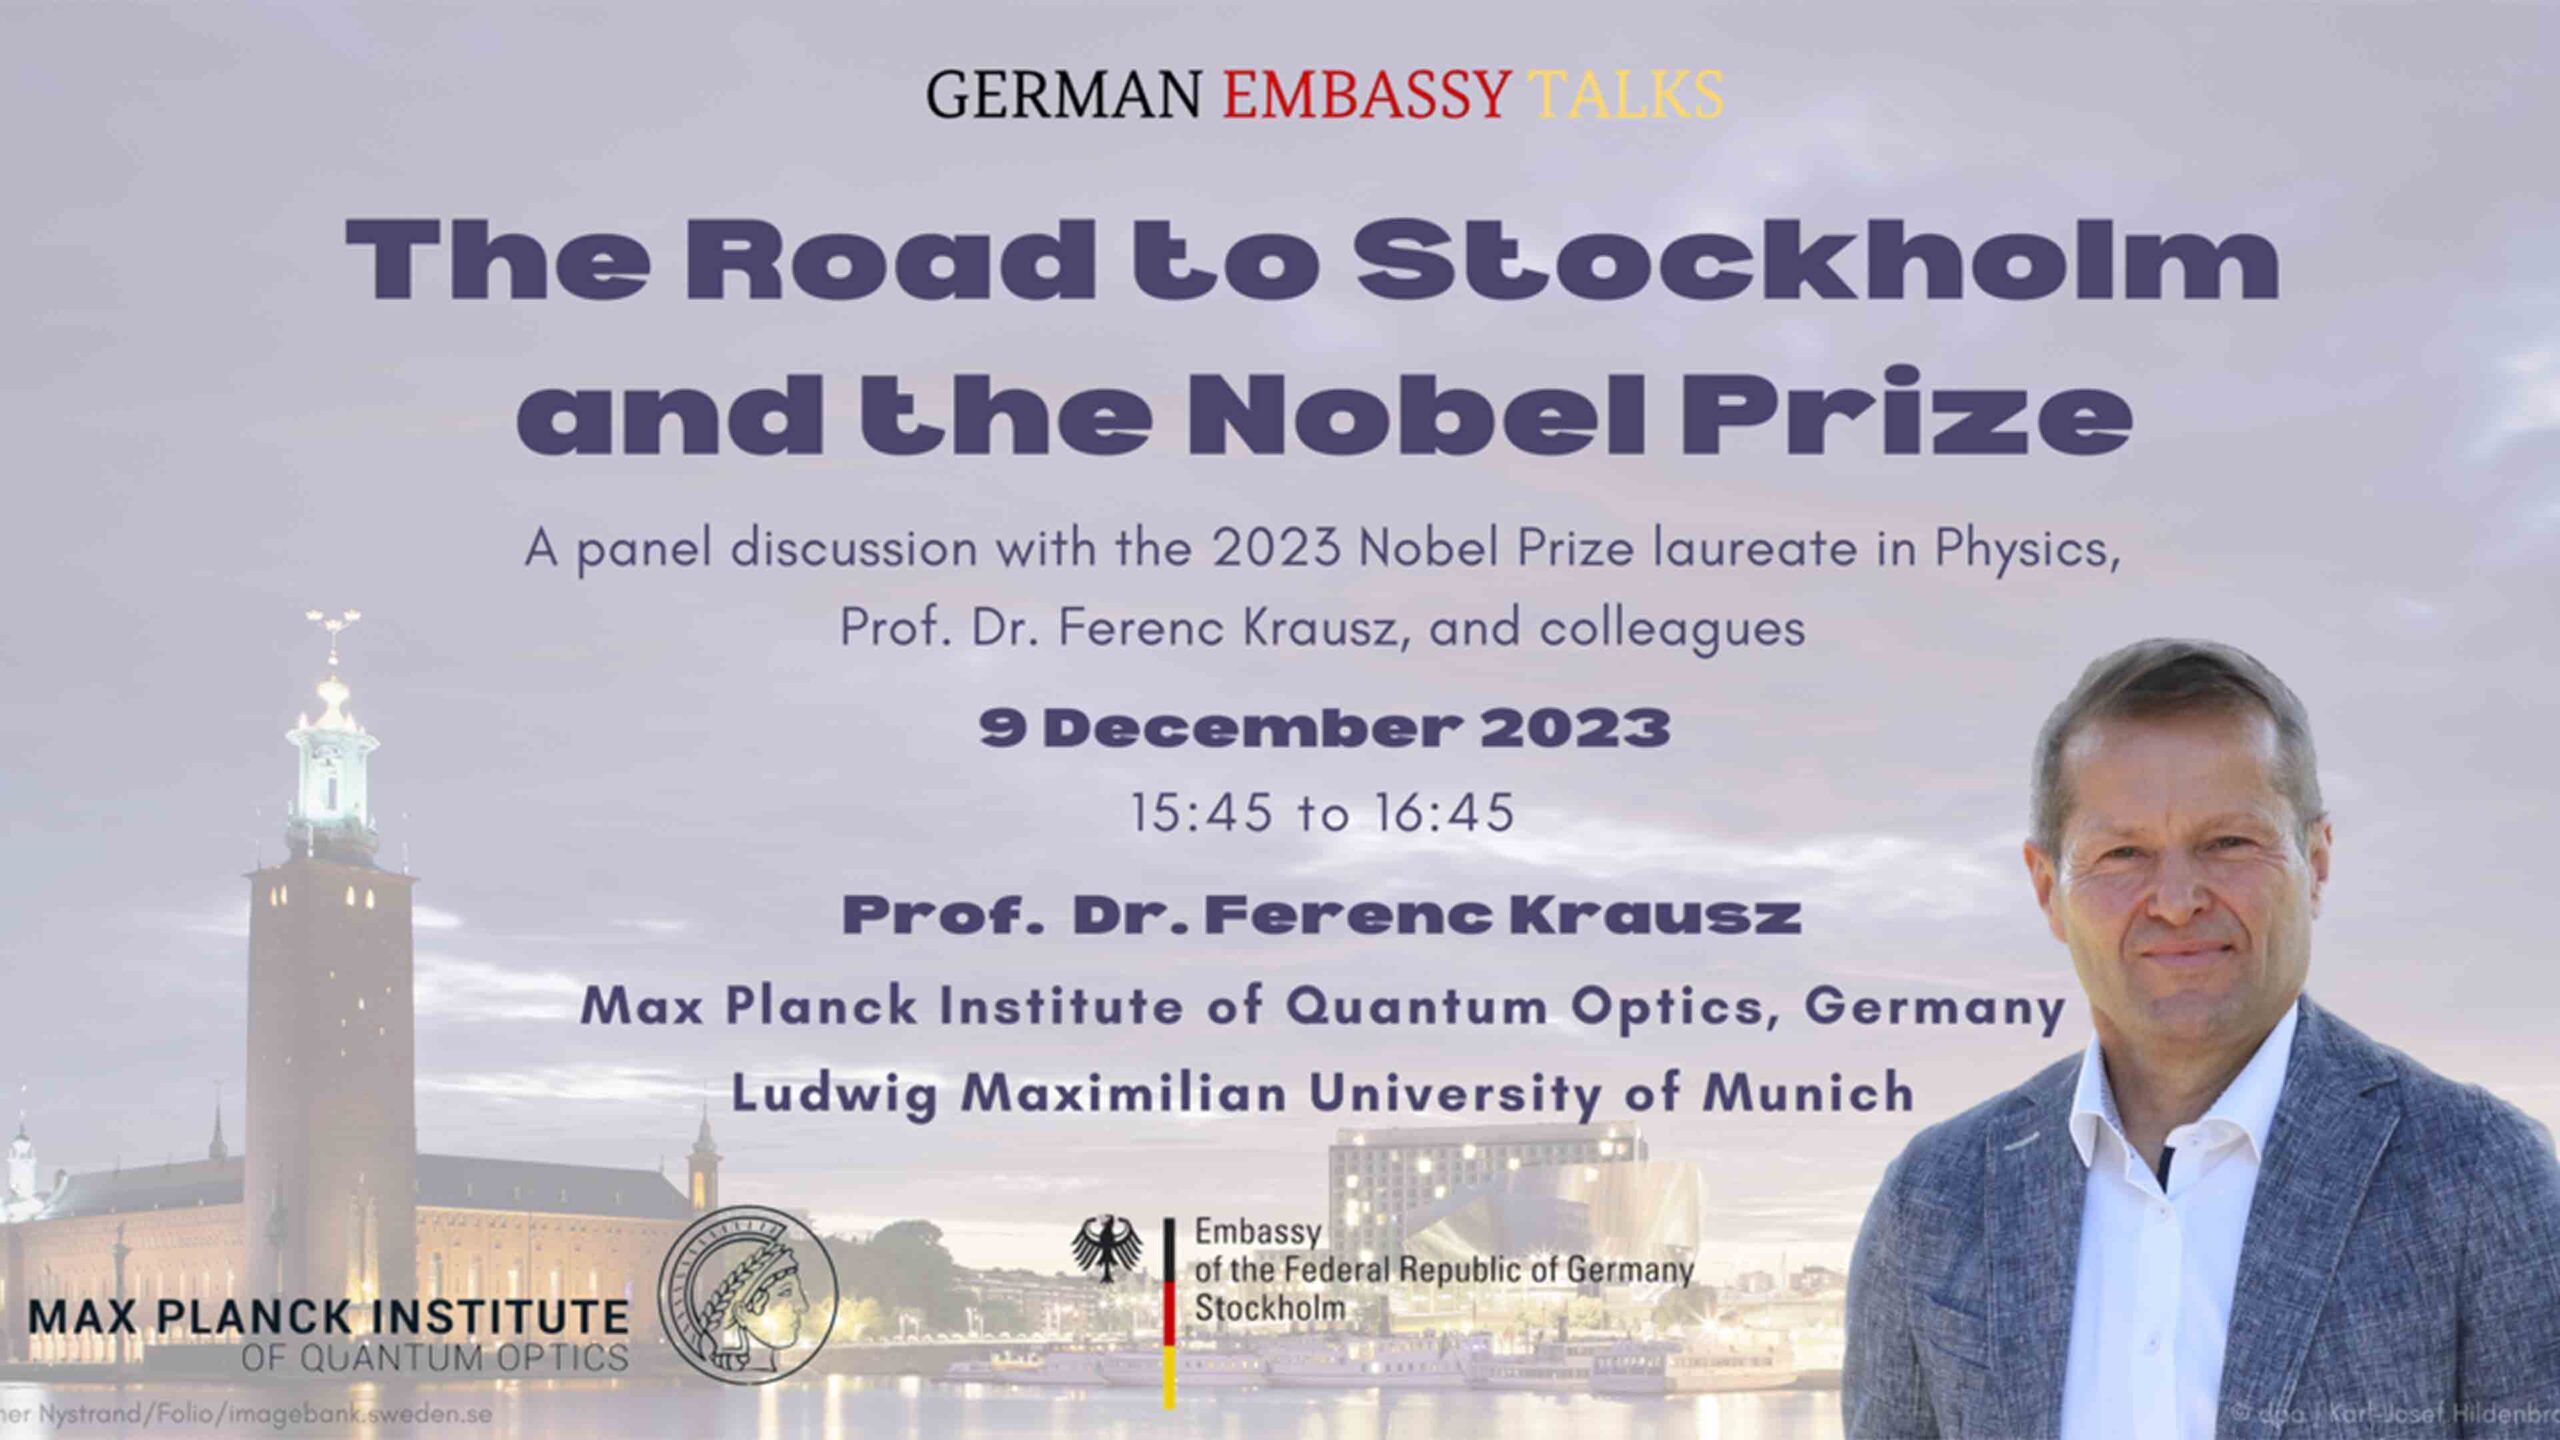 The Road to Stockholm and the Nobel Prize 